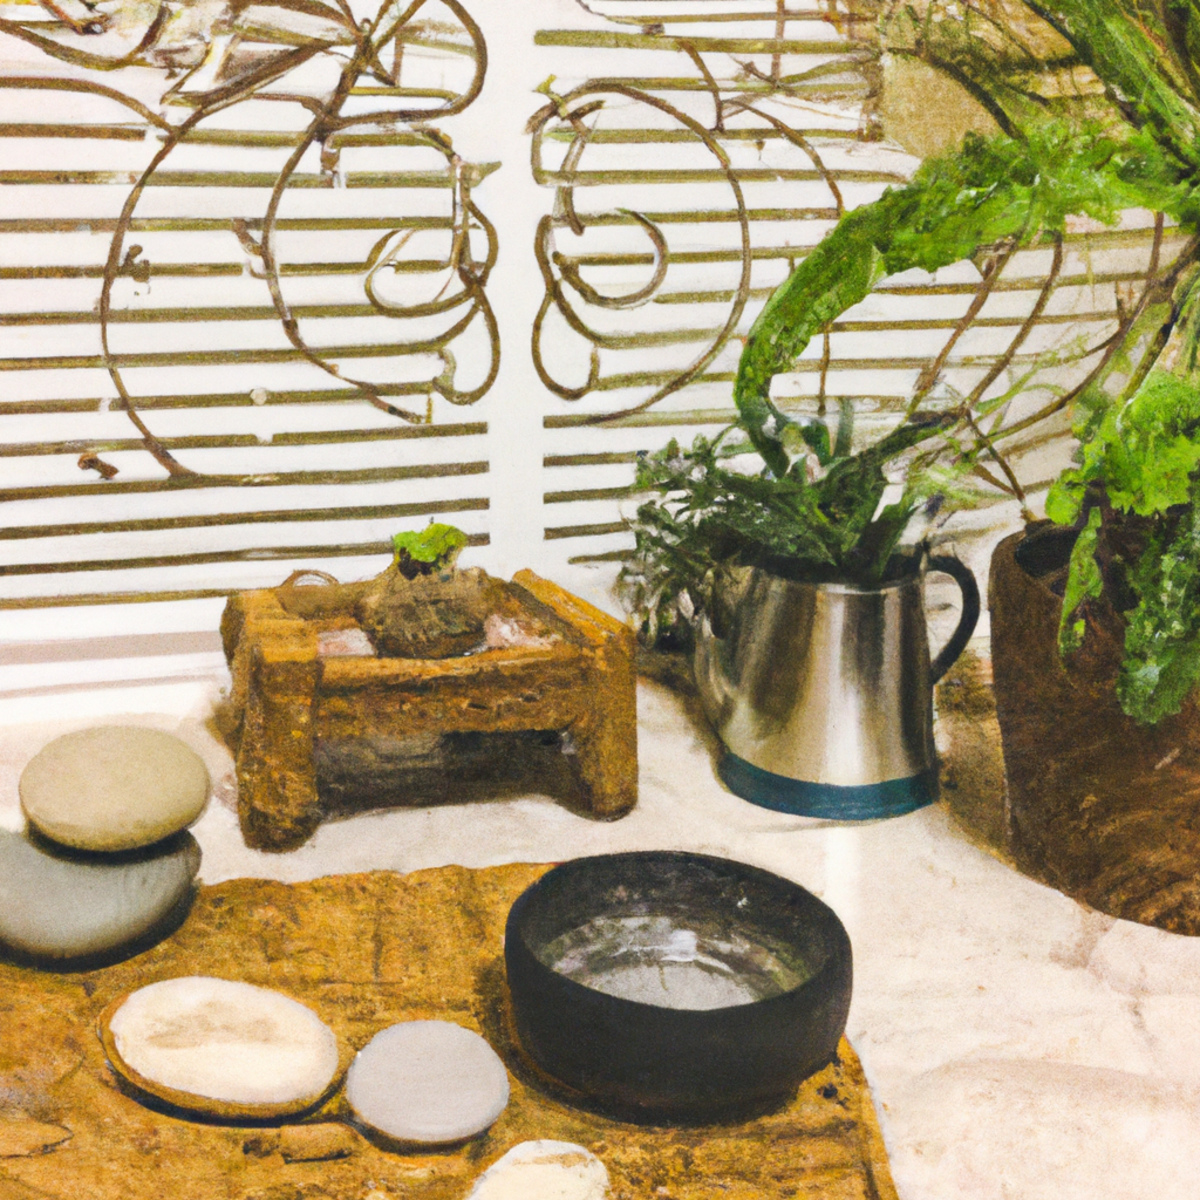 Holistic approaches to stress management - A tranquil room with a fountain, yoga mat, diffuser, and books on energy medicine, promoting relaxation and stress relief.